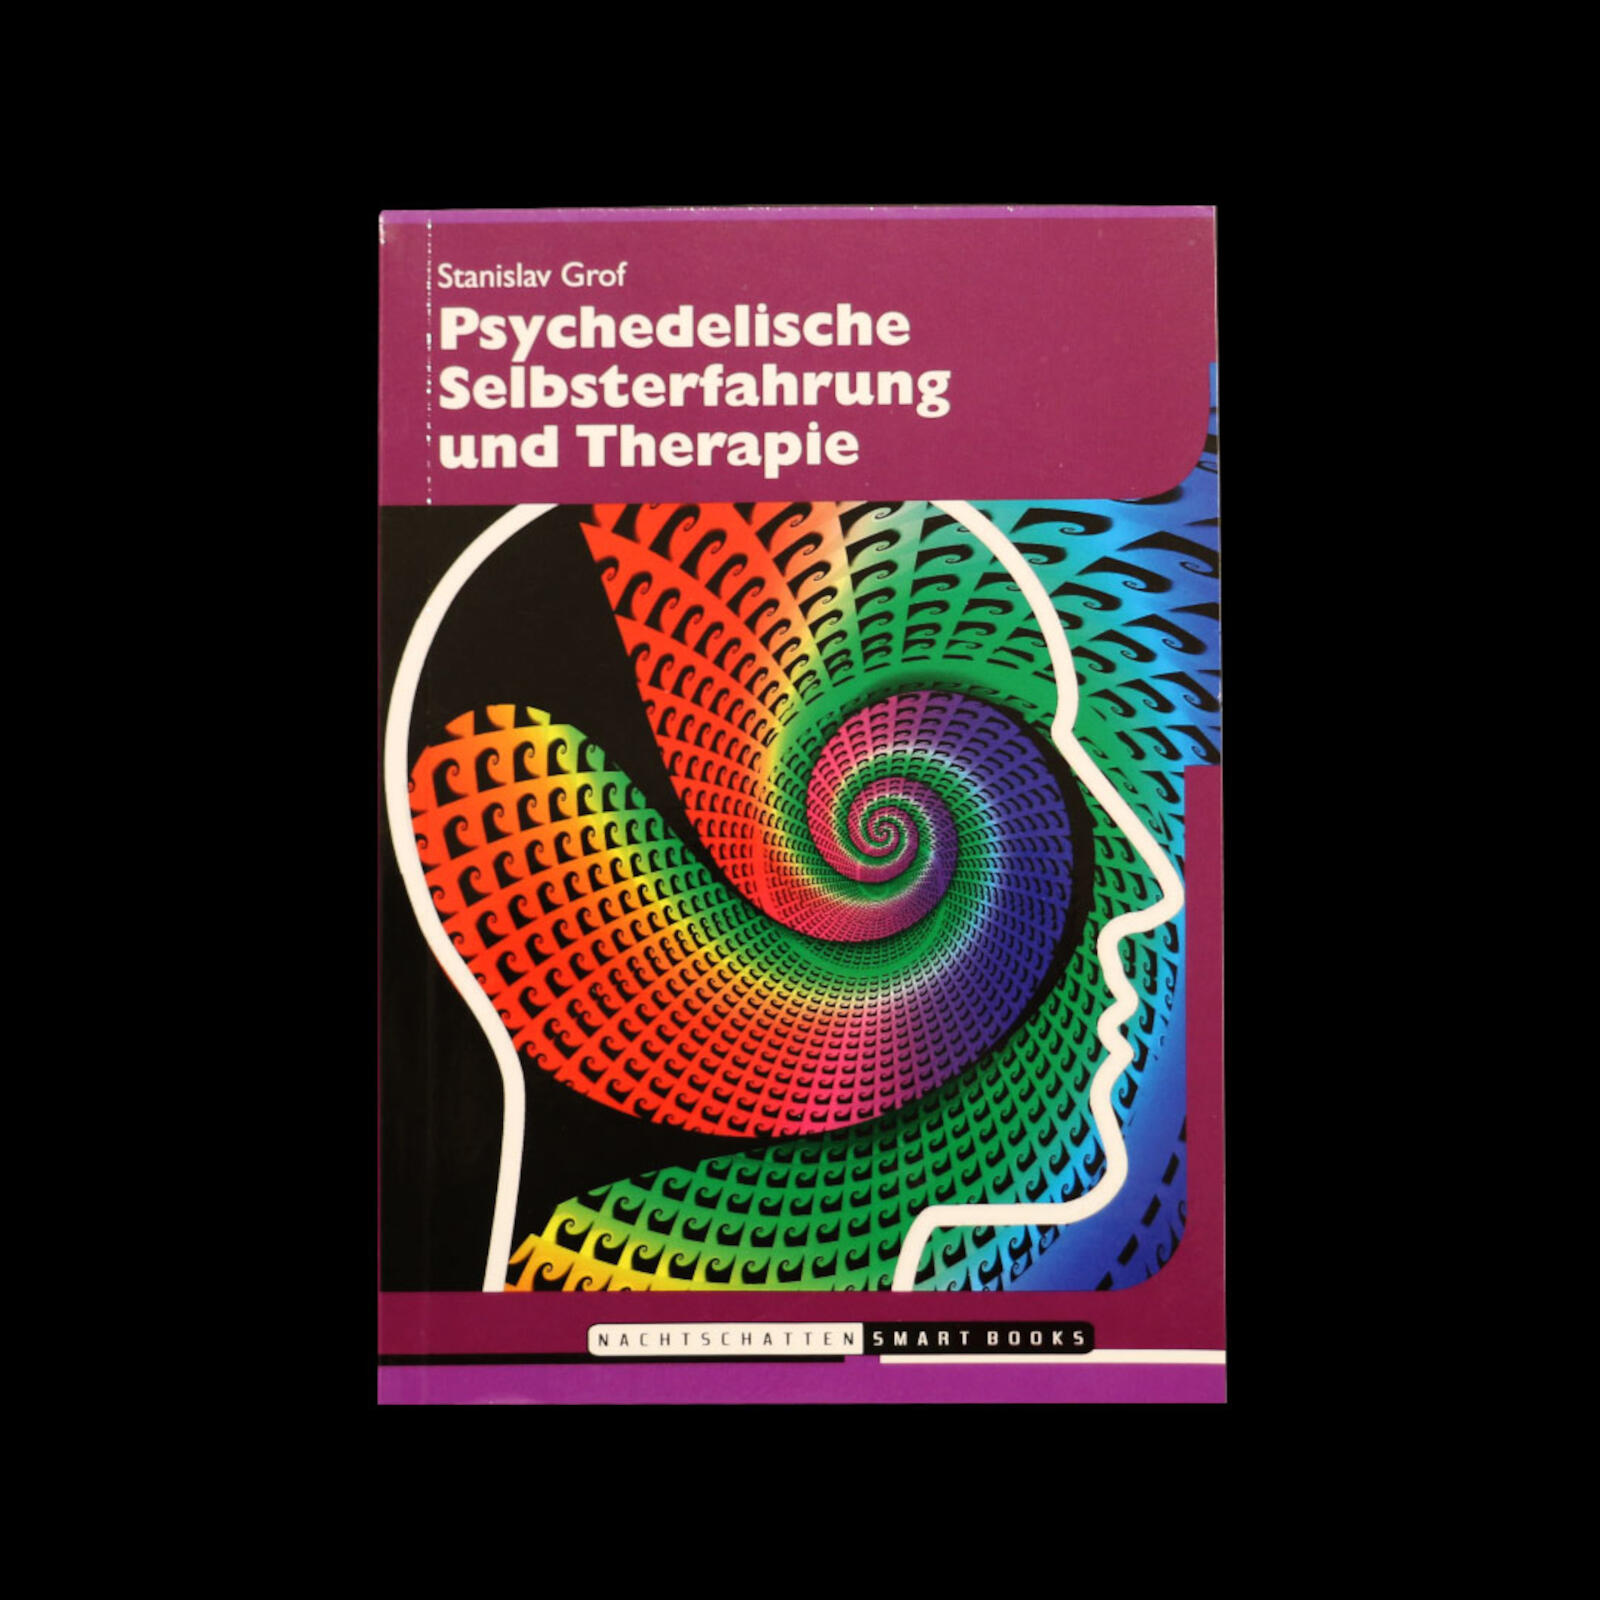 Psychedelic Self-Experience and Therapy